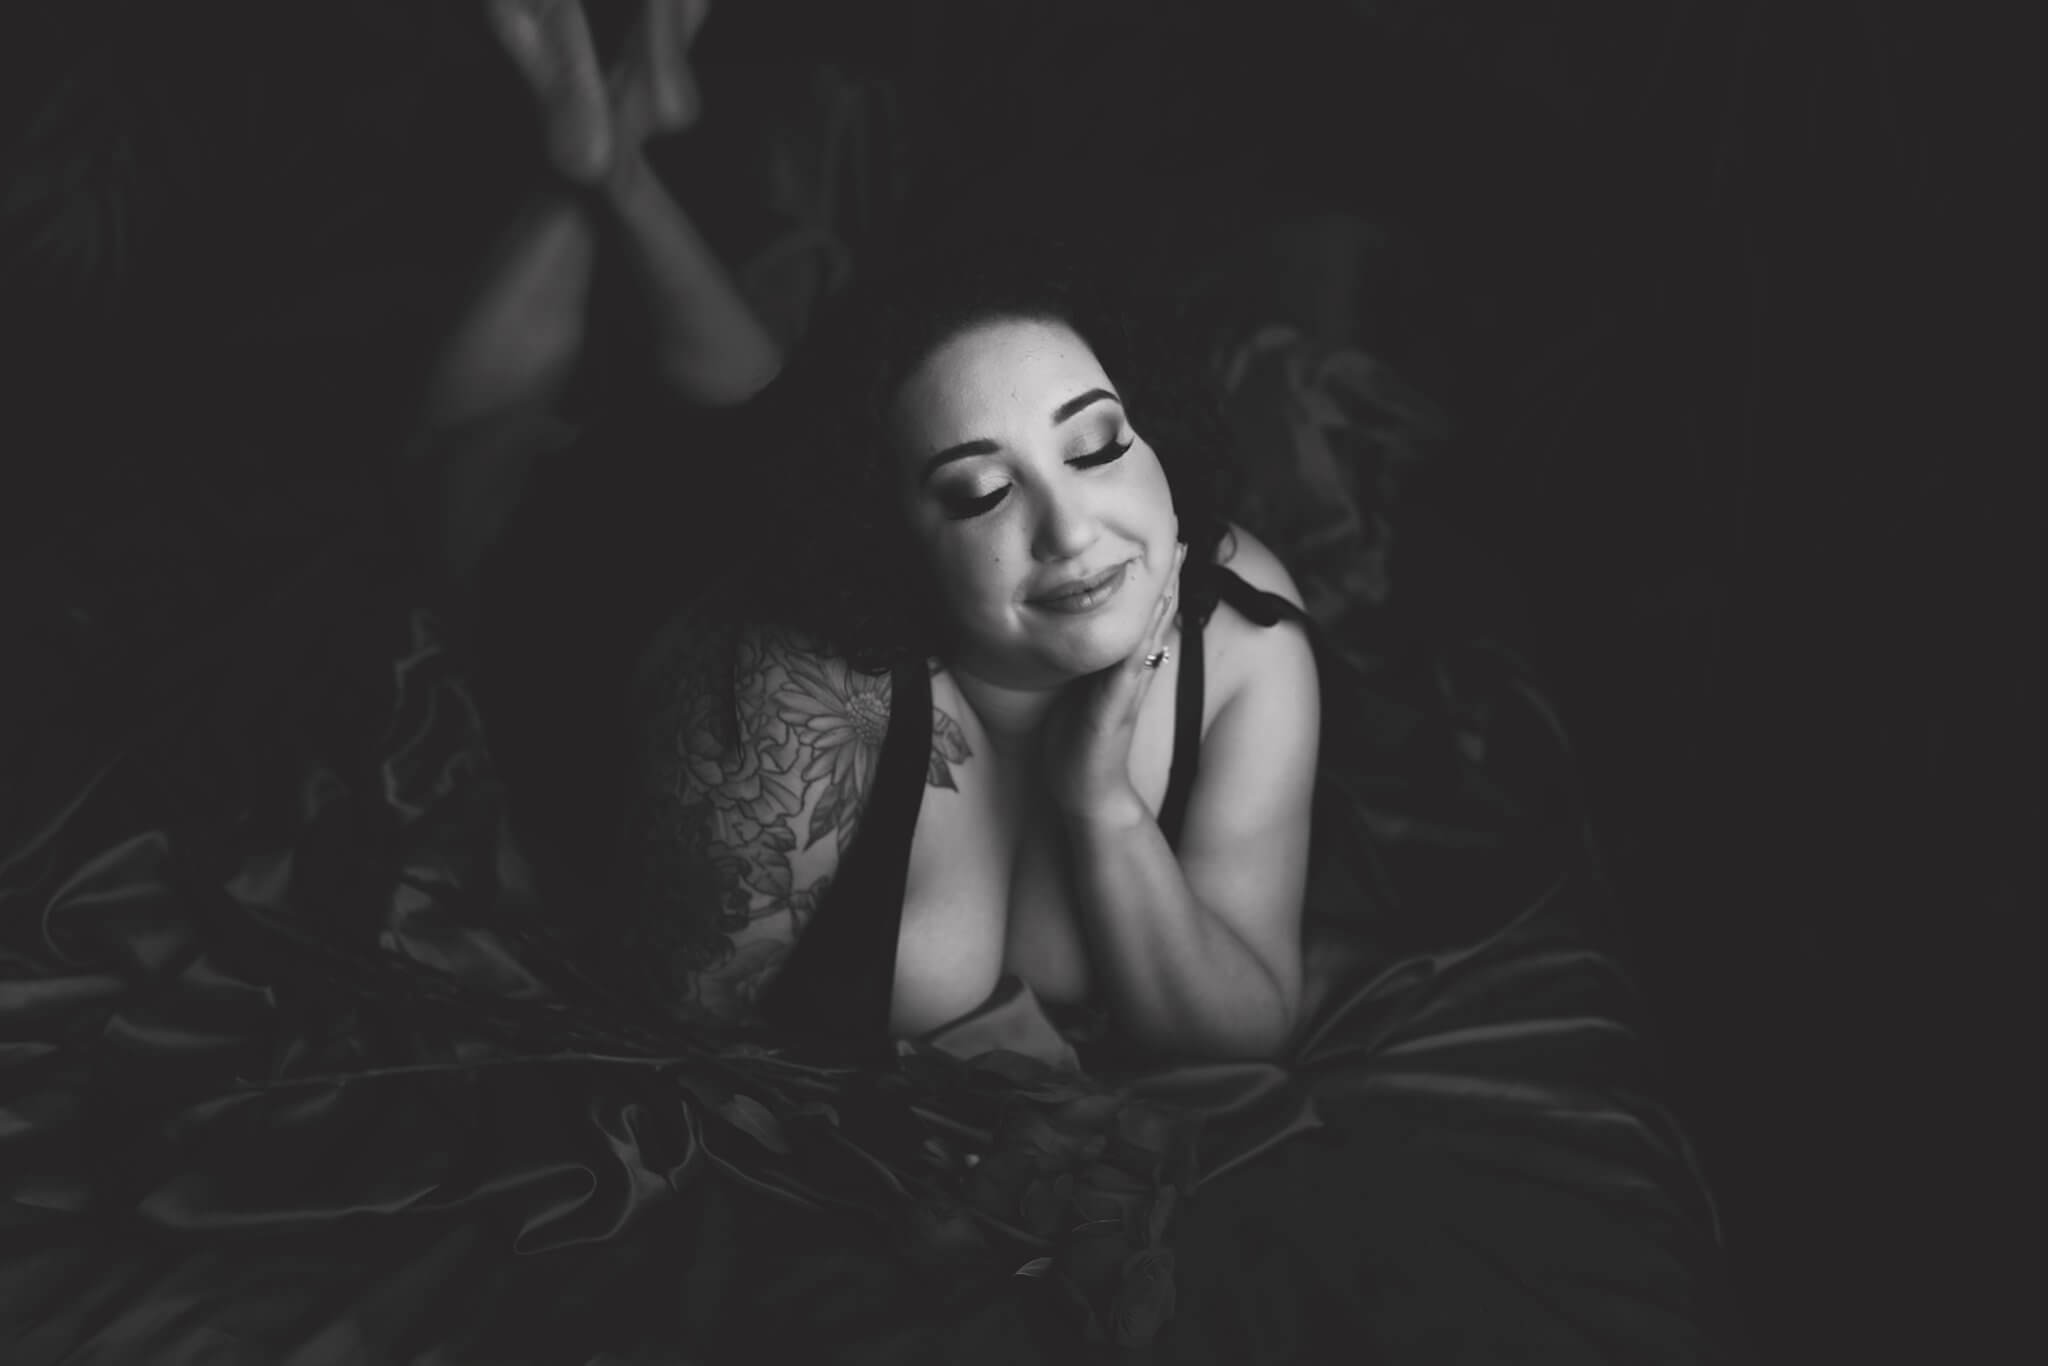 Black & White photo of a woman lying on her stomach in black lingerie on red satin sheets, she has tattoos on her right arm and left leg